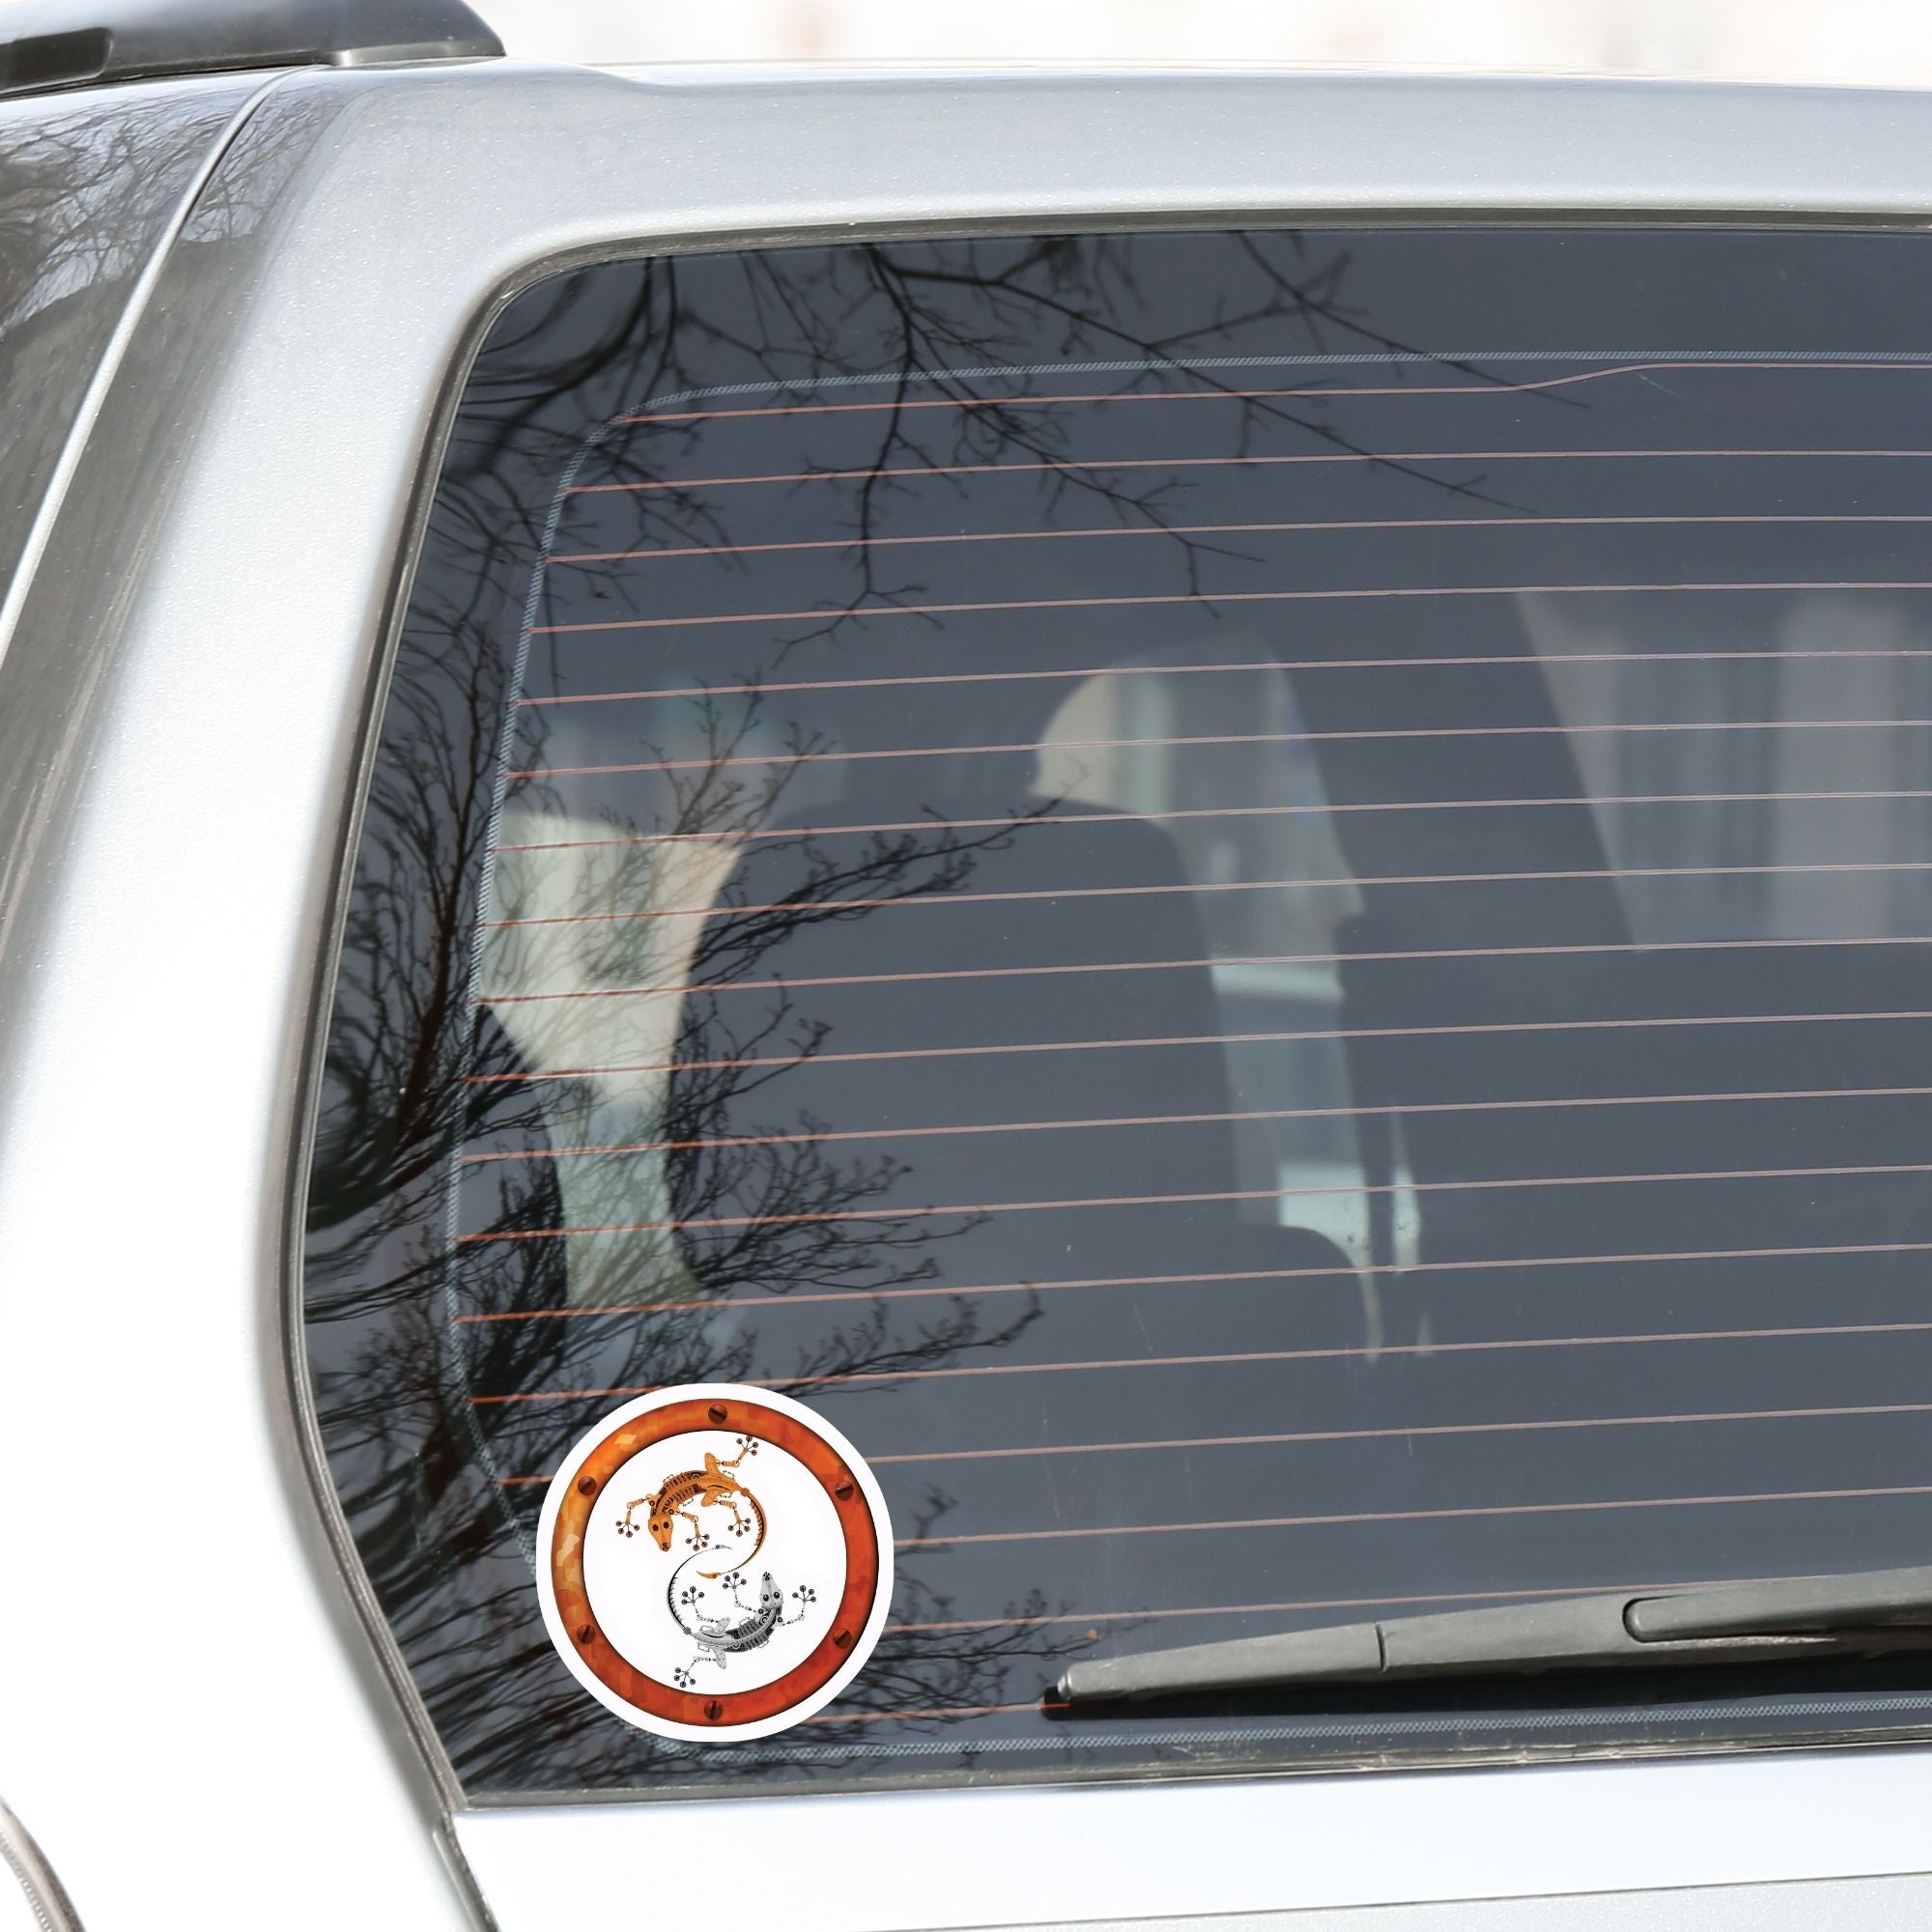 This round individual die-cut sticker features a rusty ring with screws on a white background with two mechanical geckos, one silver and one rust colored, in a yin-yang configuration. This image shows the steampunk geckos sticker on the back window of a car.